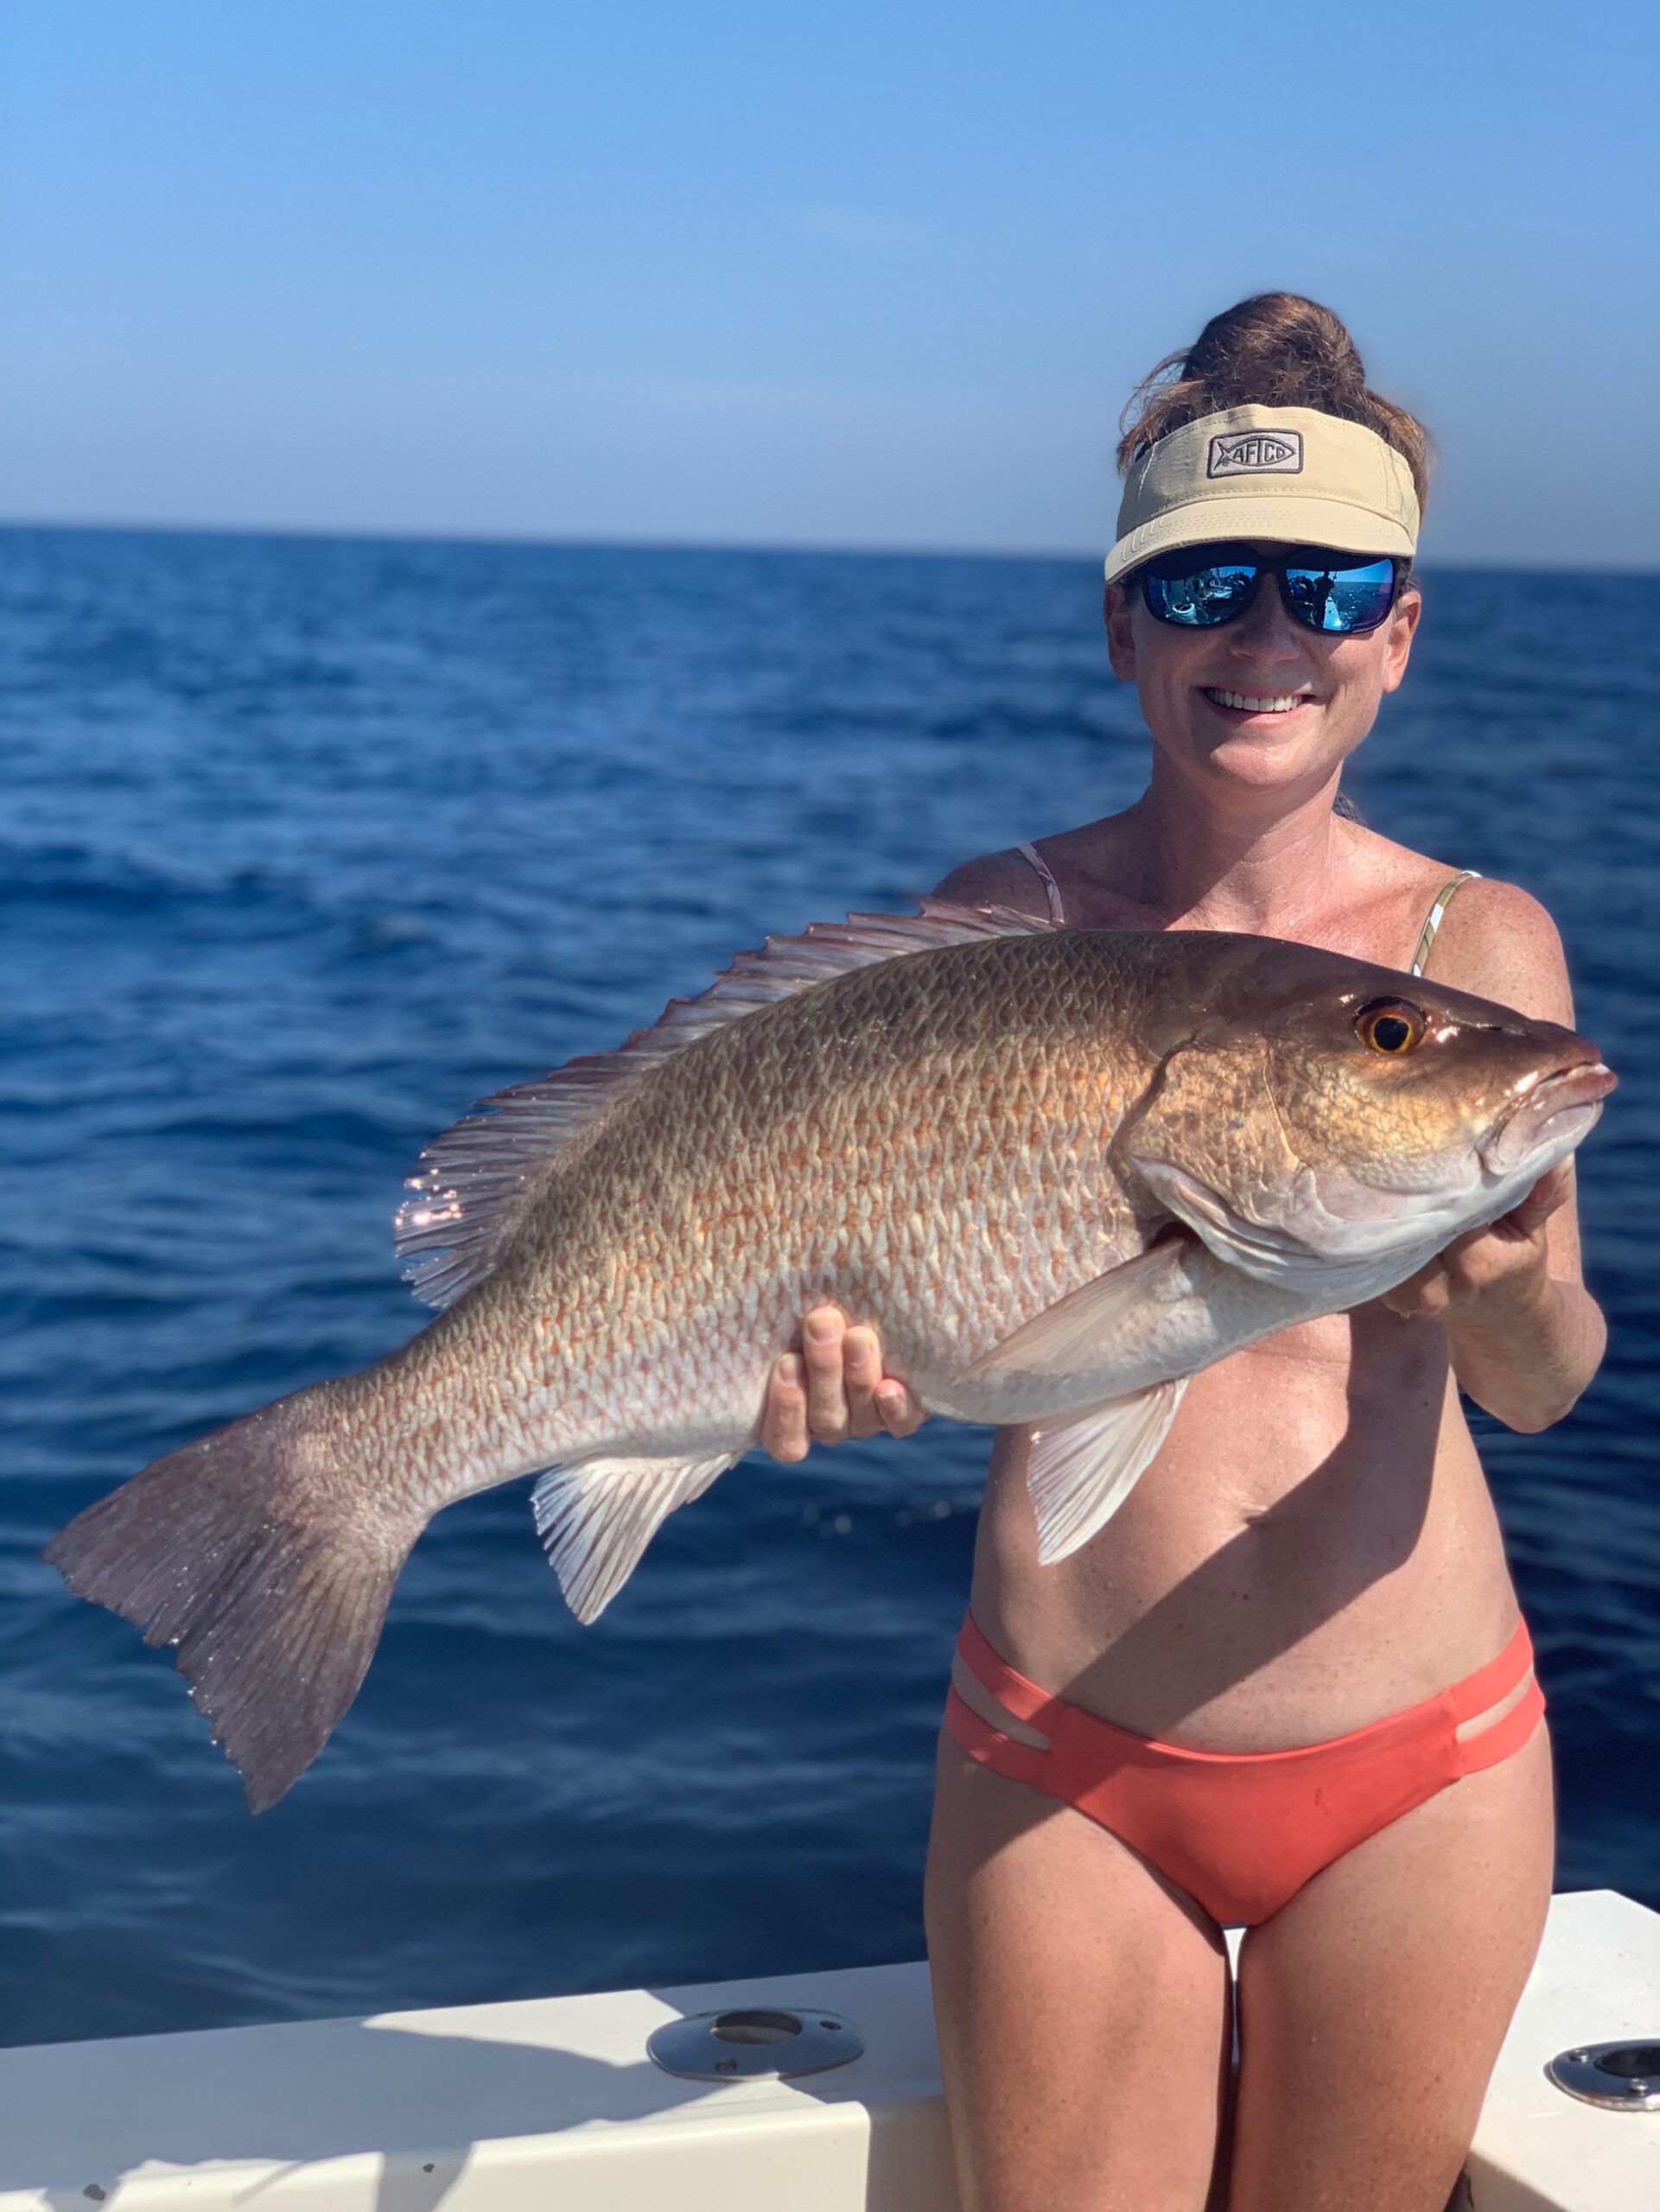 Amazing Fishing, The Giant Fish Pulled The Girl Down